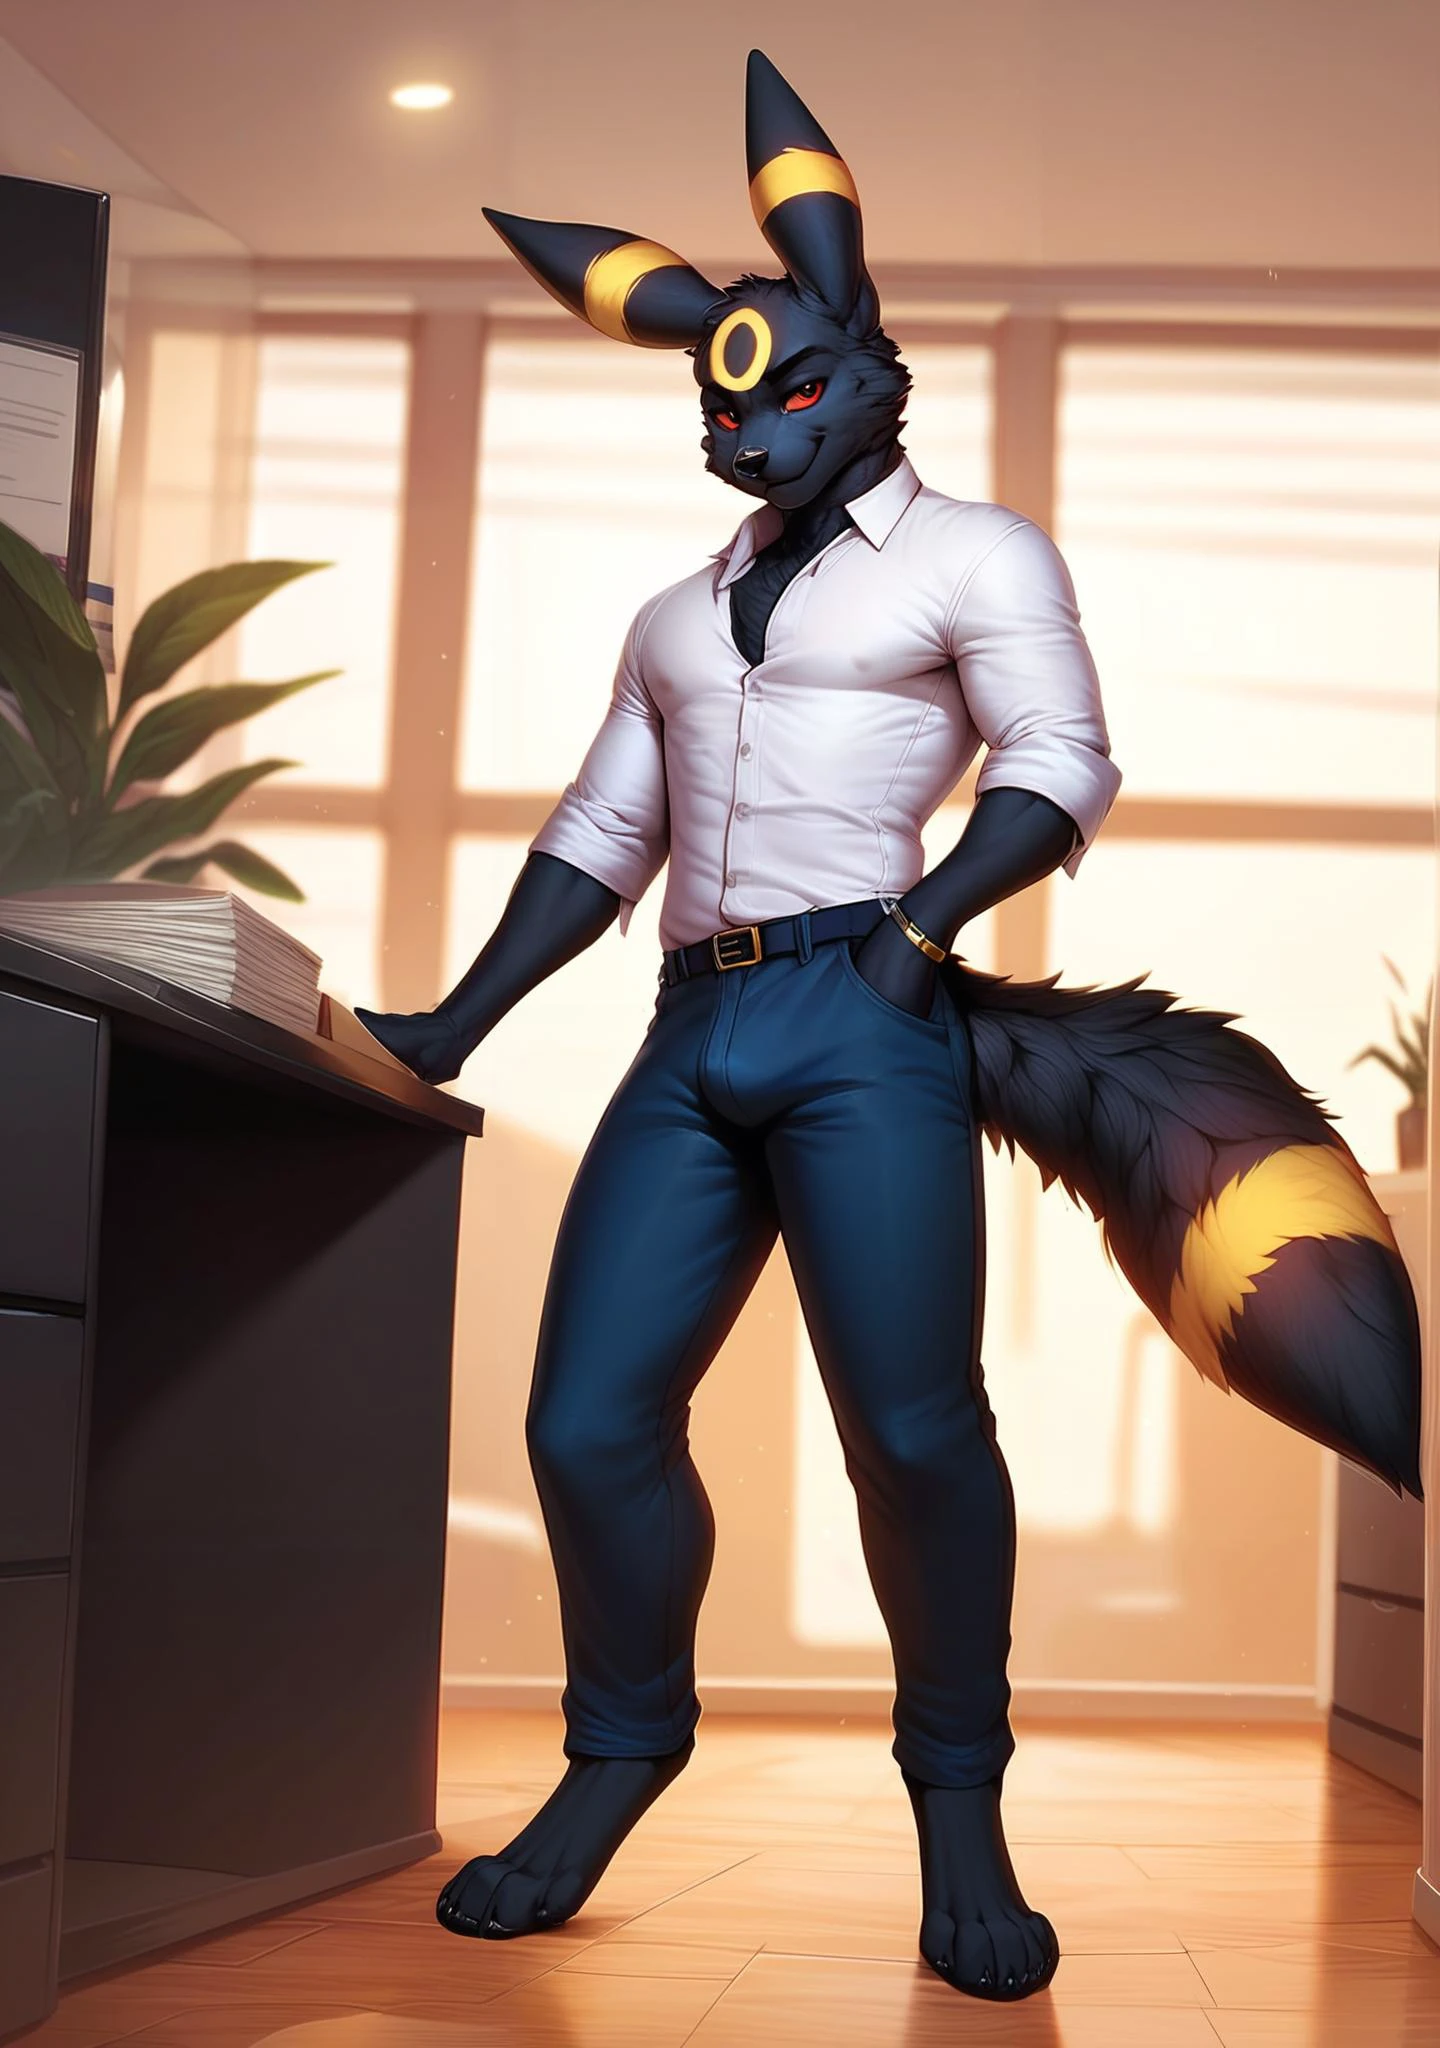 score_9, score_8_up, score_7_up, score_6_up, score_5_up, score_4_up, rating explicit, source furry BREAK
 umbreon, black body,  black fur, yellow markings, 5 fingers,  male, solo, collared shirt, pants,  full-length portrait, standing, office,  eeveelution,